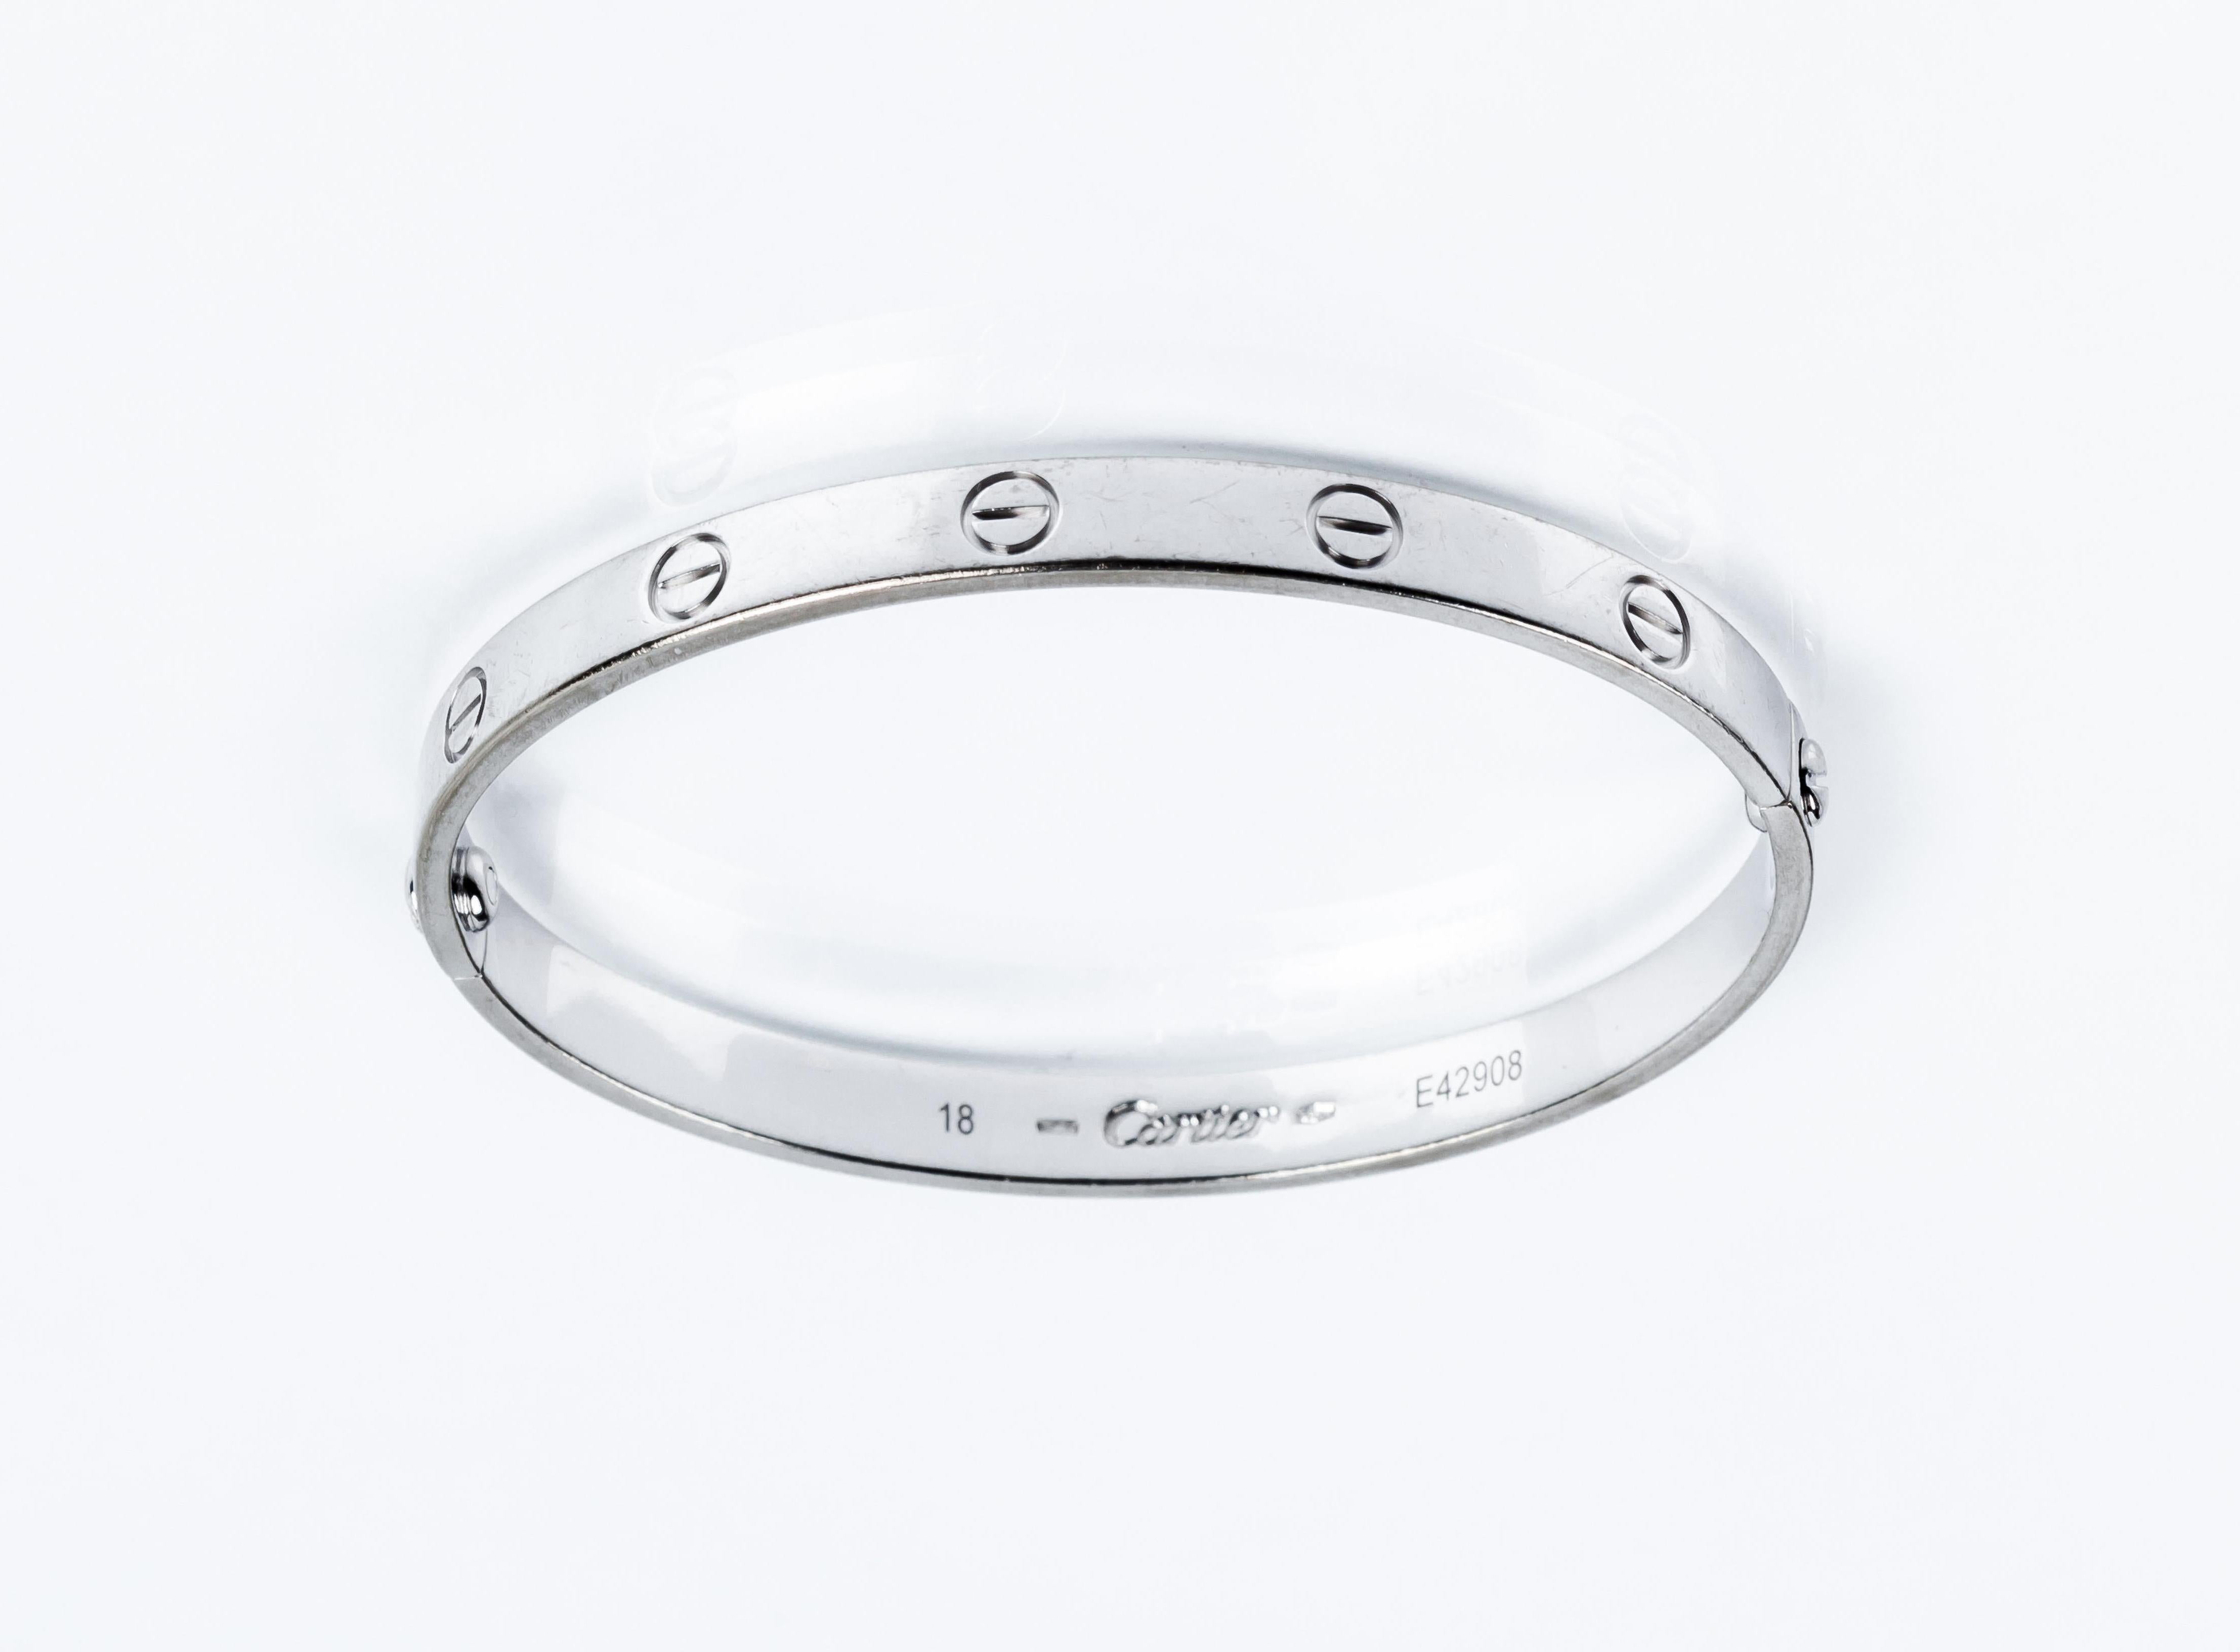 CARTIER LOVE BRACELET
Solid 18k white gold
This model is original from 1993 and it has been serviced and polish in 2023 
With box and papers 
Large width 5-6 mm
Weight 32.2 grams
If the robust locking mechanism and miniature screw heads that